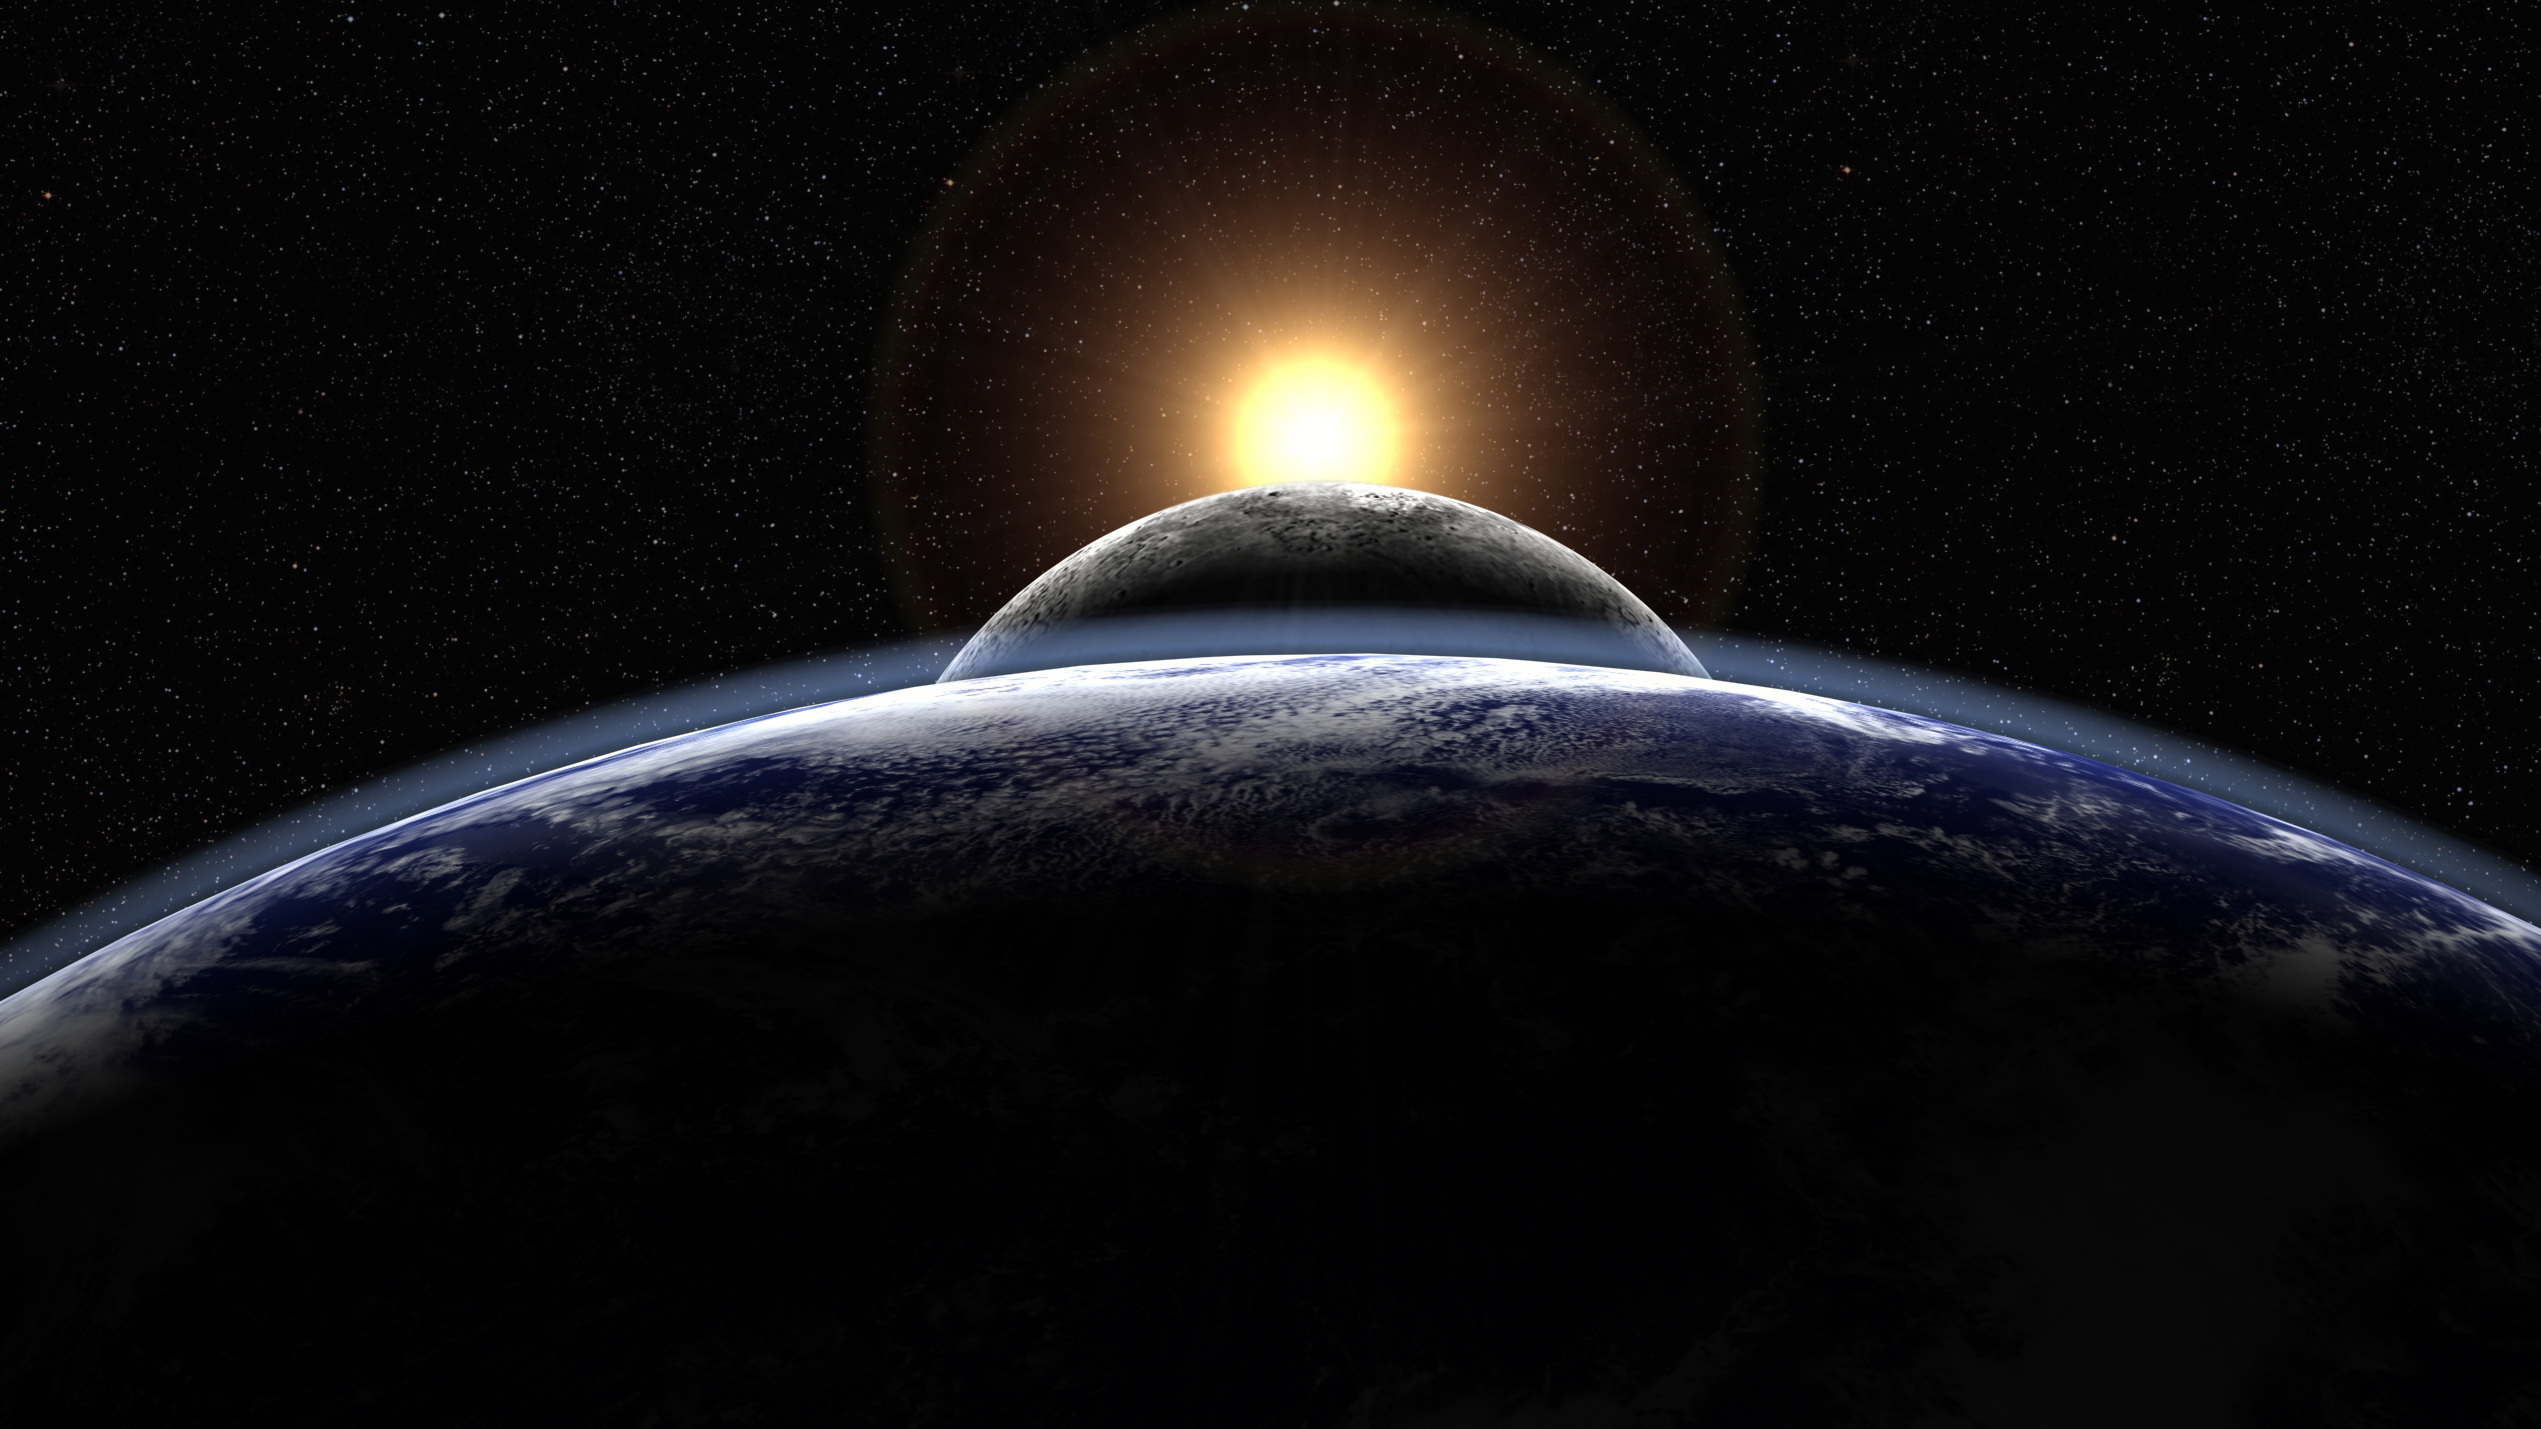 Earth's moon stabilizes the planet's orbit.